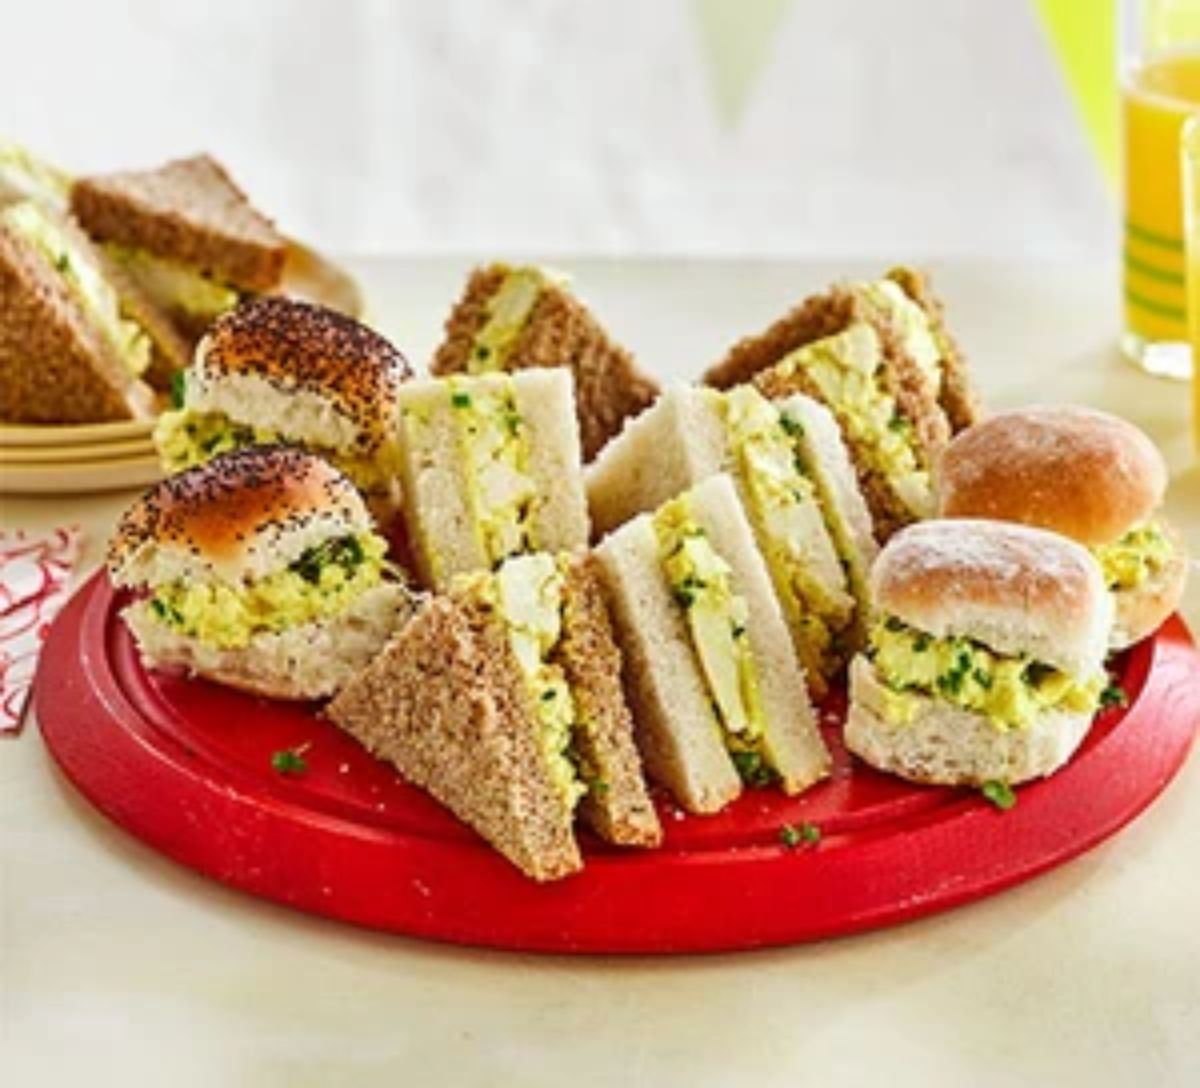 Eggless mayo sandwiches on a red tray.